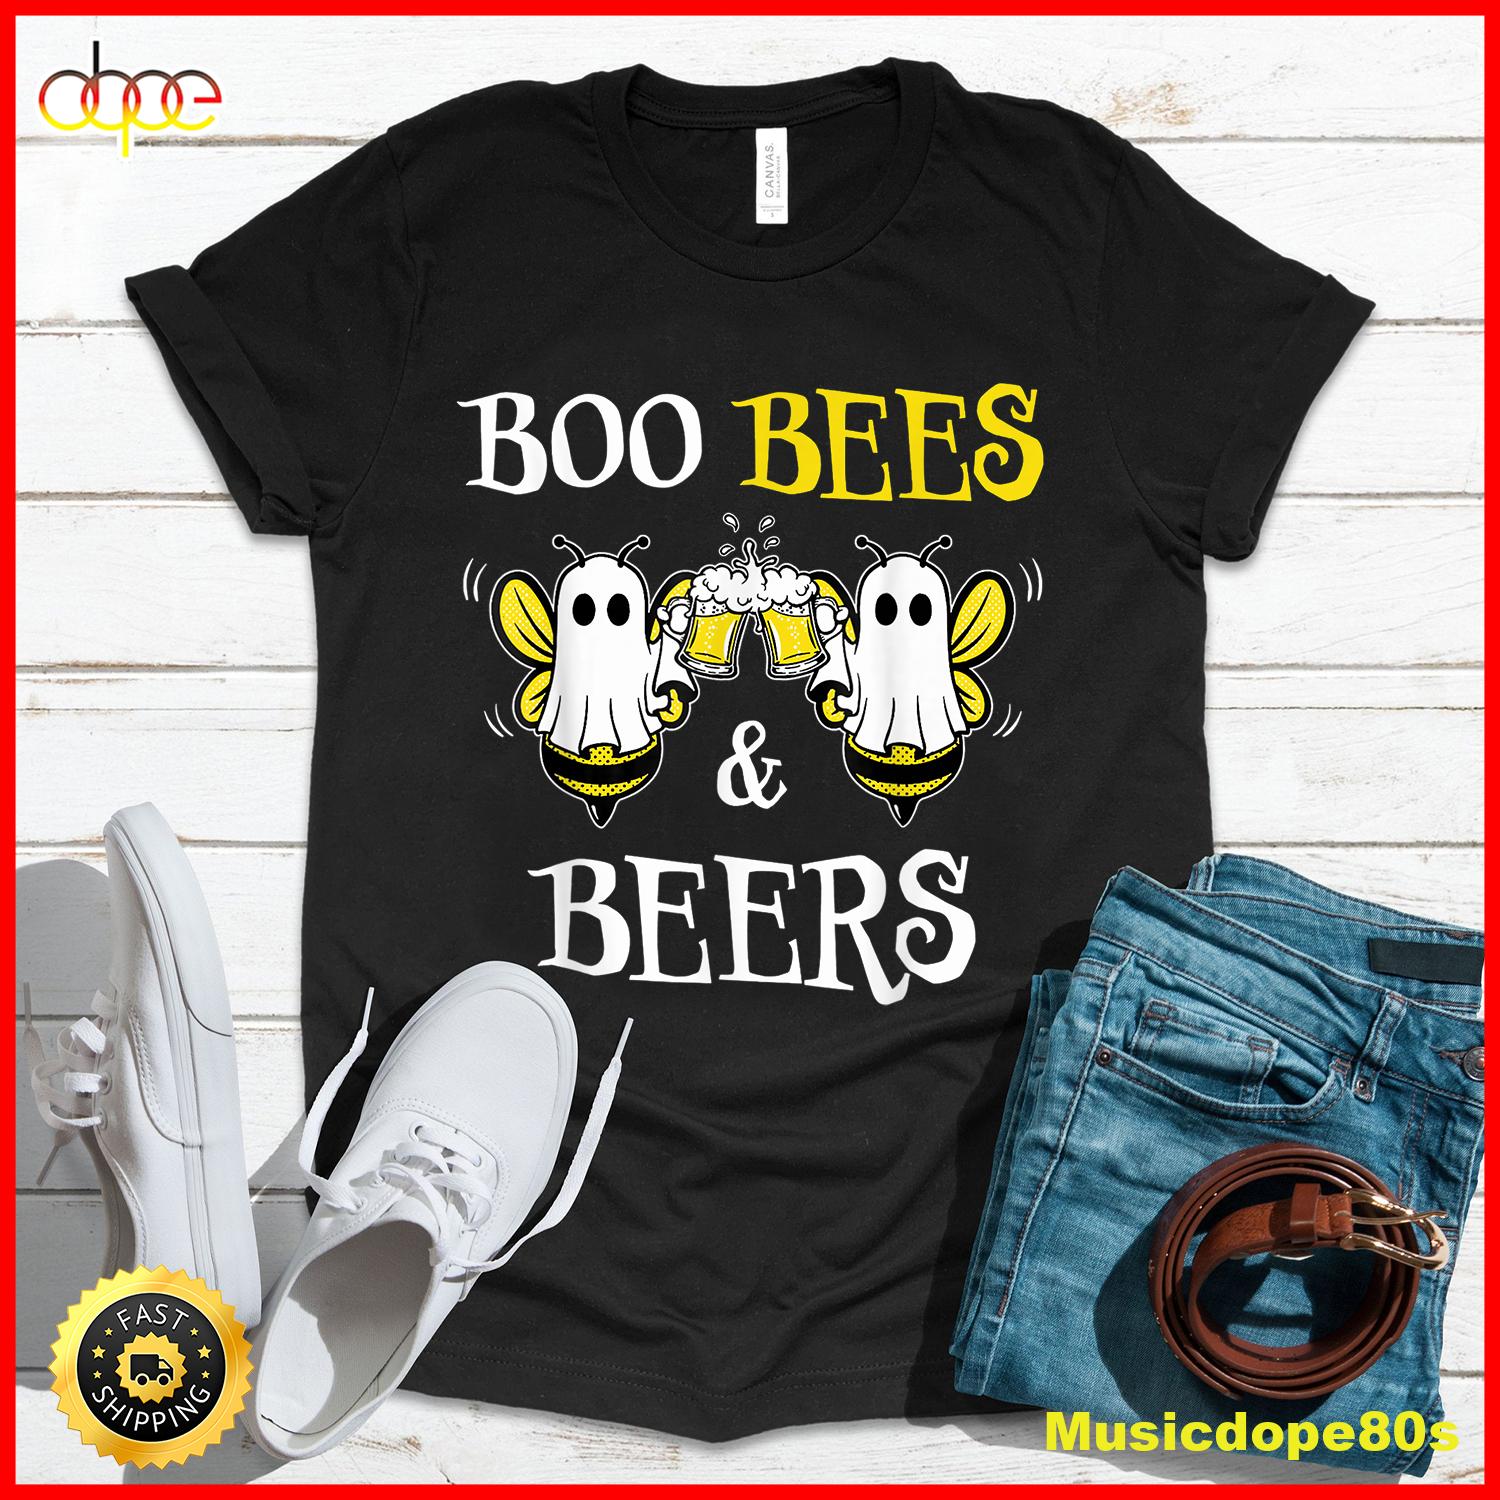 Boo Bees Beers Couples Halloween Costume T Shirt